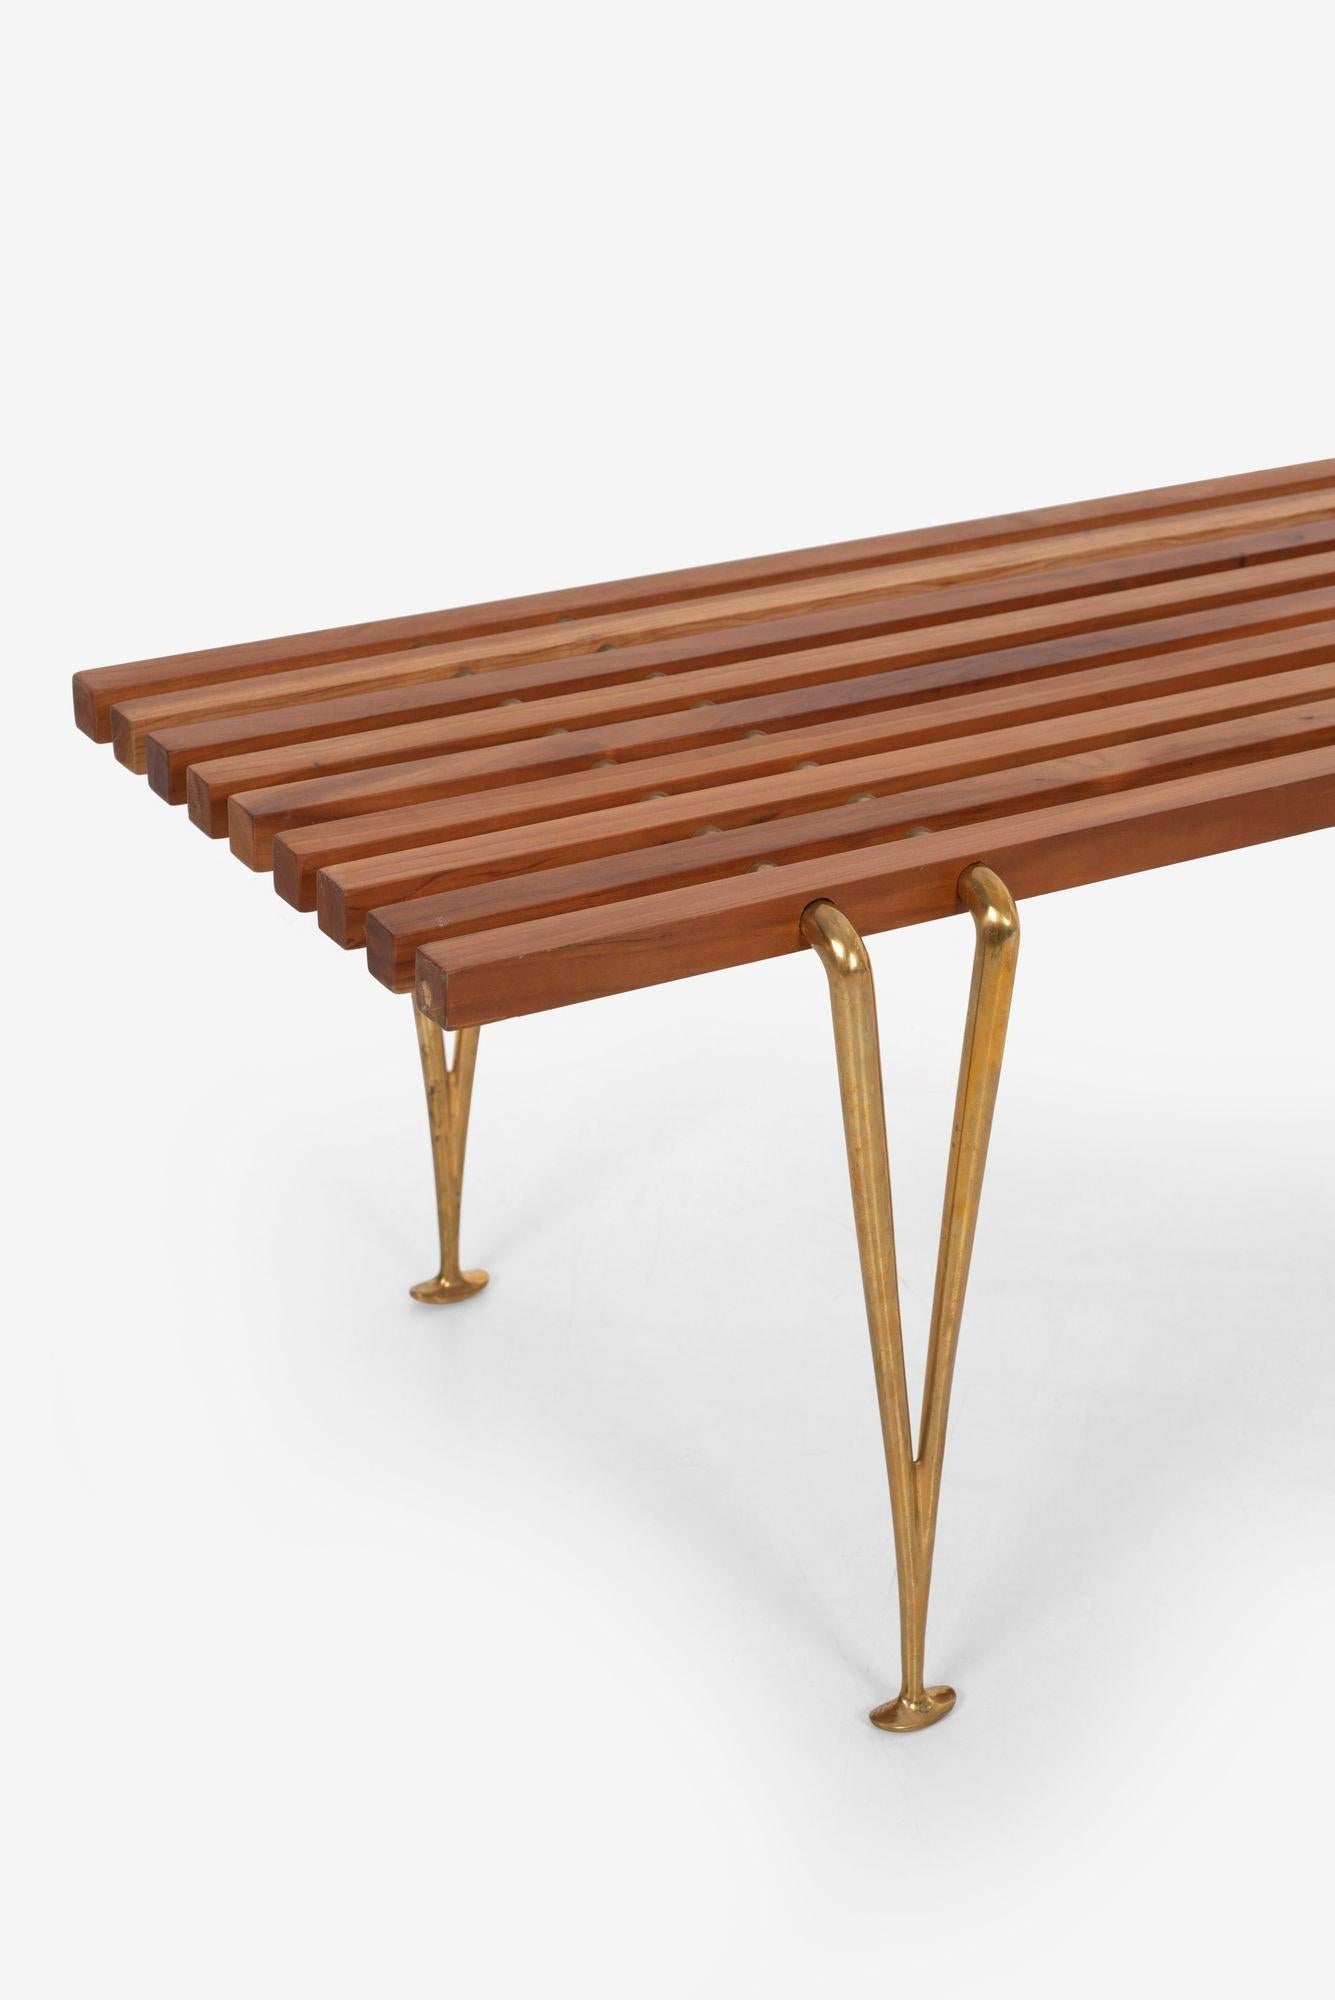 Hugh Acton Slat Bench In Good Condition For Sale In Chicago, IL